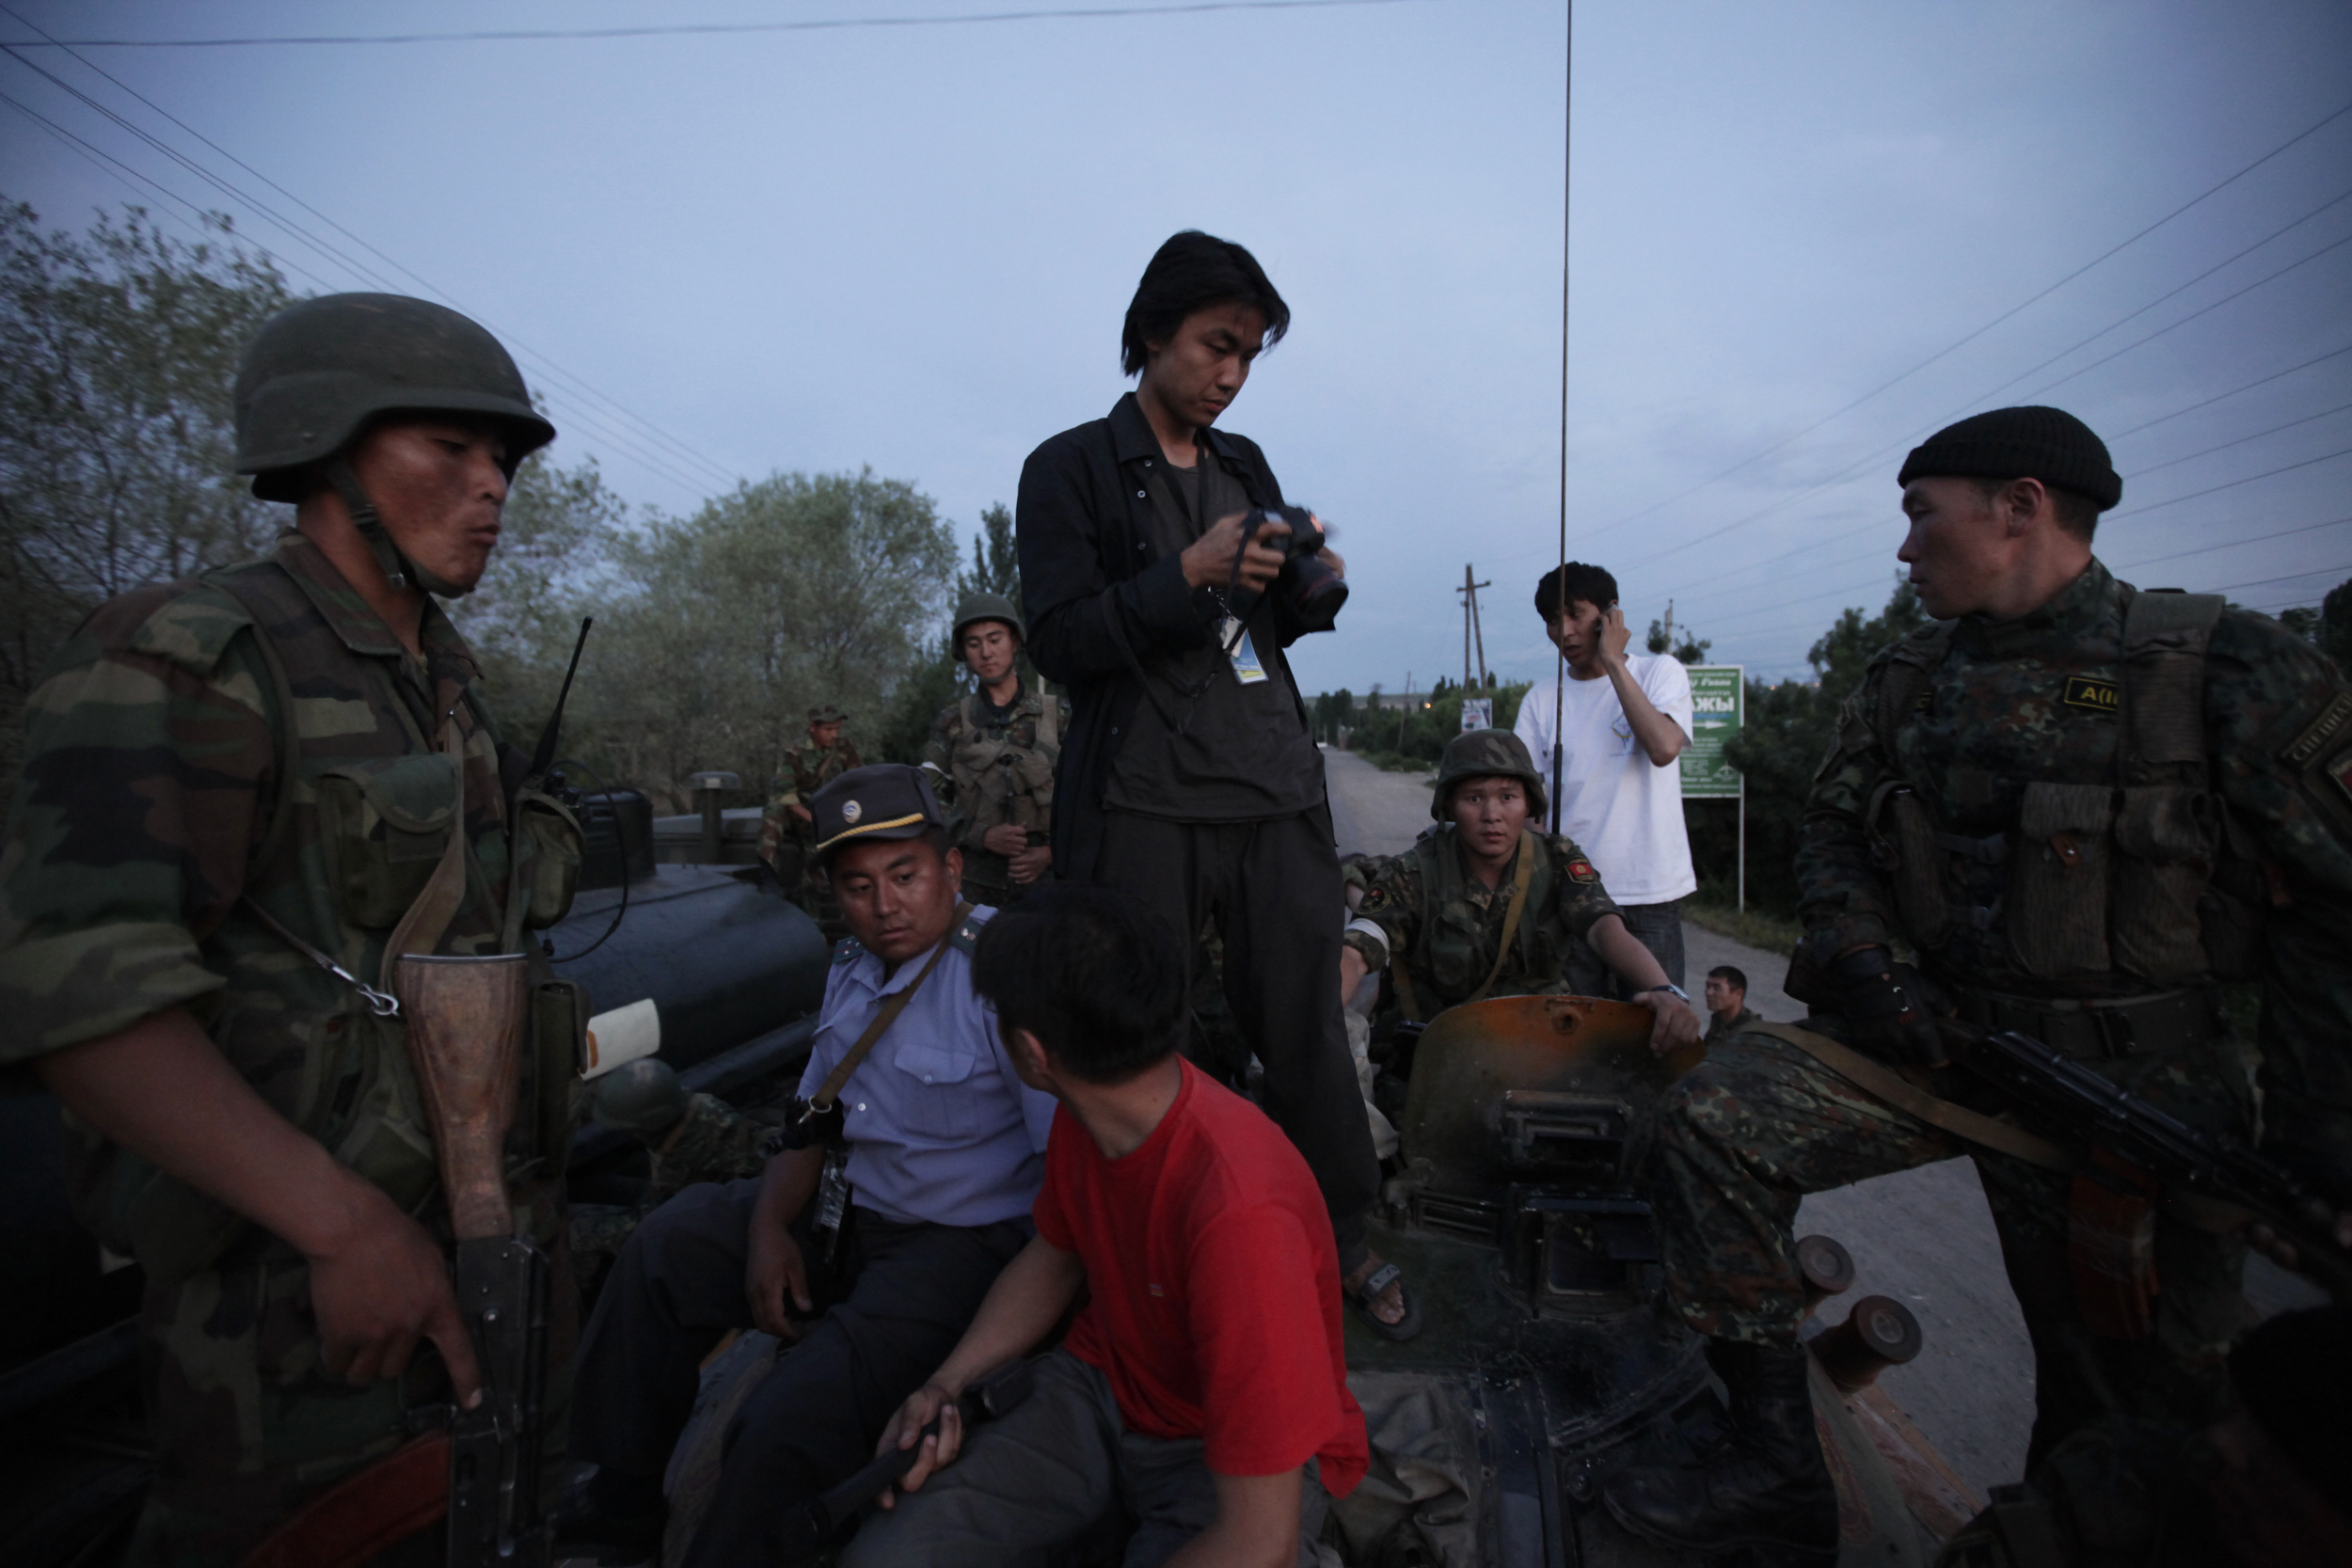 Ed Ou stands atop a Kyrgyz military tank while covering a flareup of violence after ethnic Kyrgyz mobs rampaged through minority Uzbek enclaves, burning homes and businesses in Osh, Kyrgyzstan. (Marina Gorobevskaya)